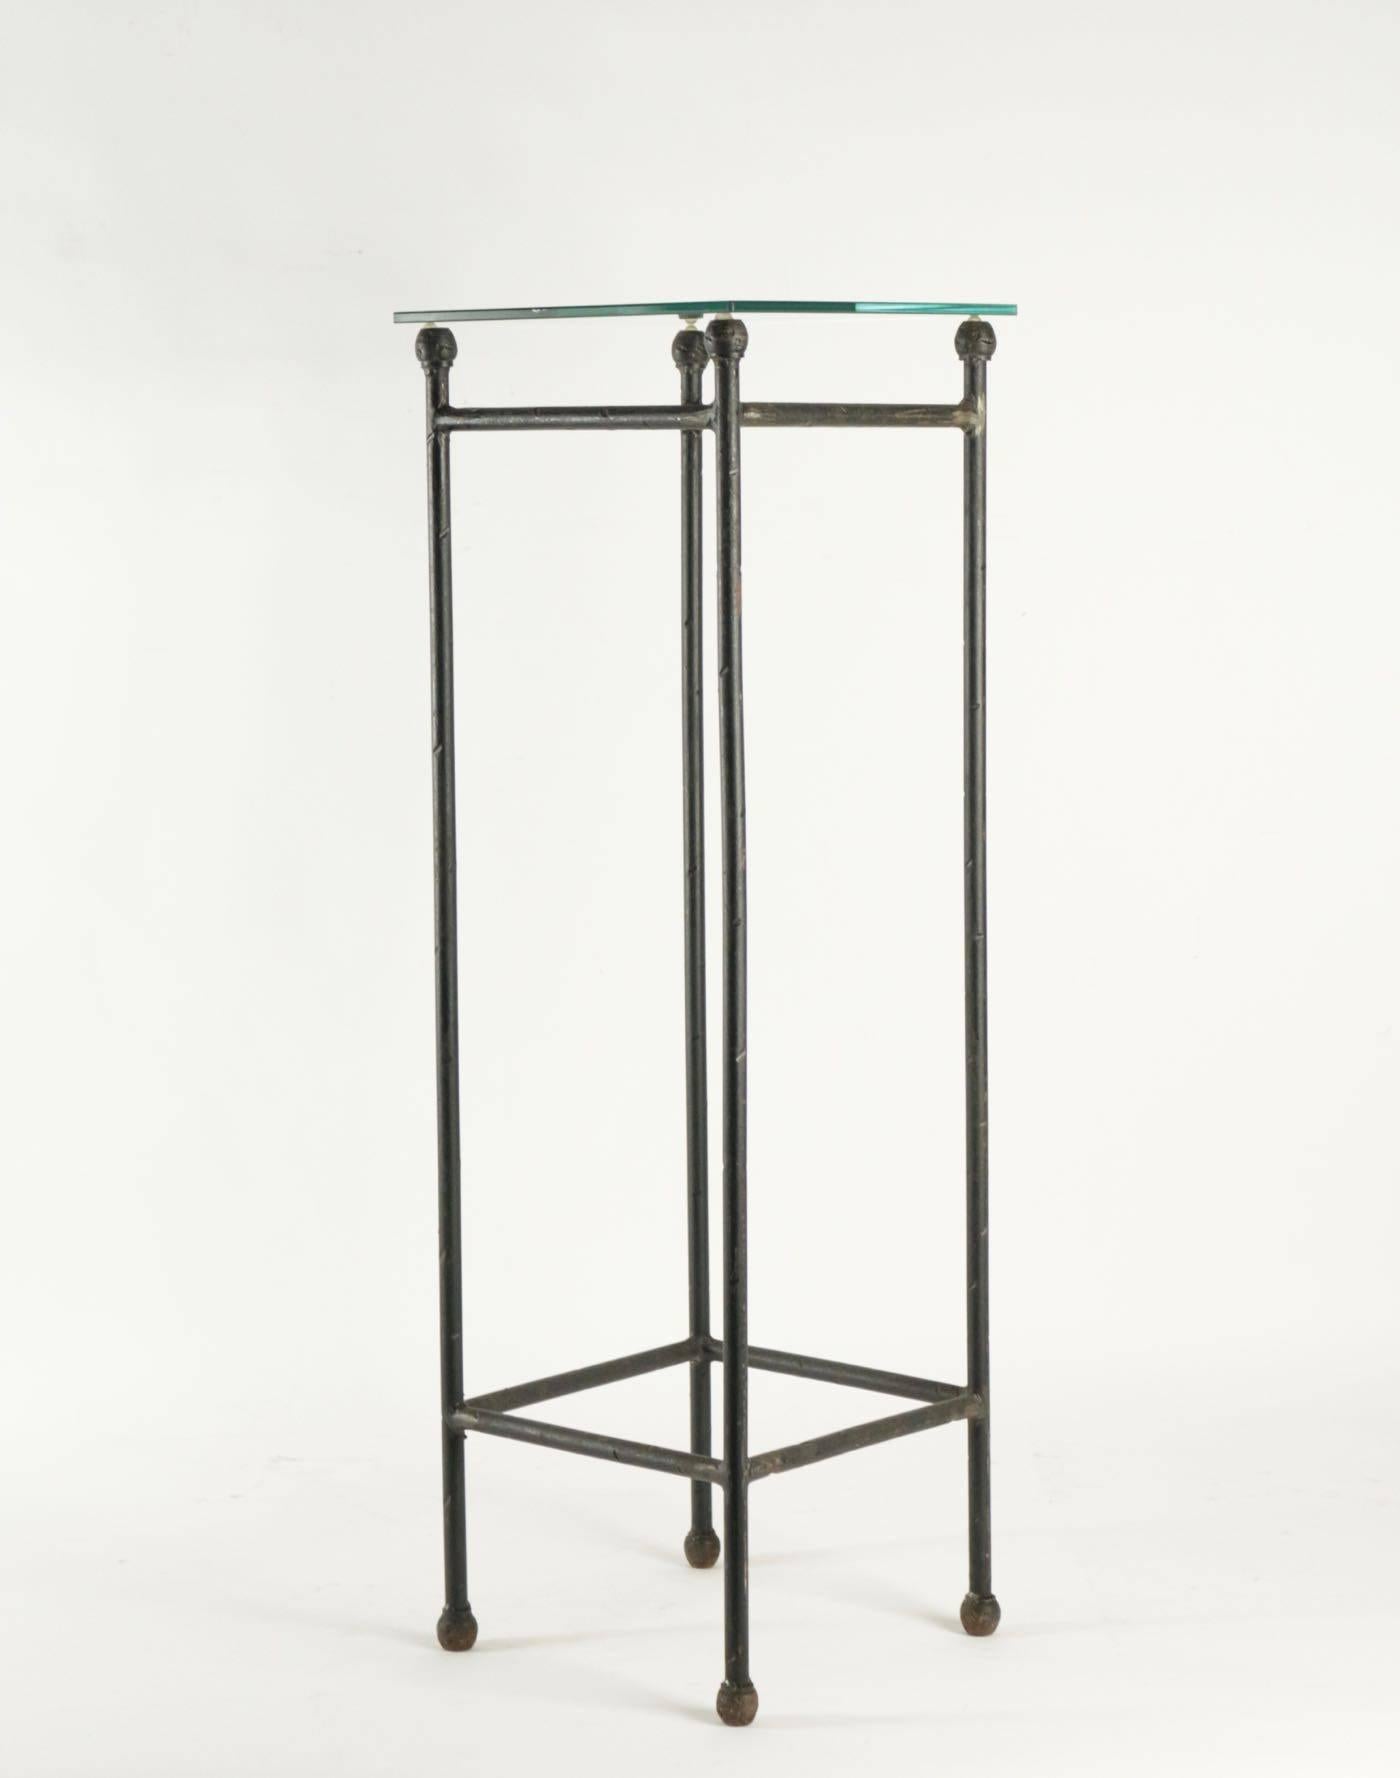 Two Consoles in Wrought Iron under Glass in an Industrial Style 20th Century For Sale 3